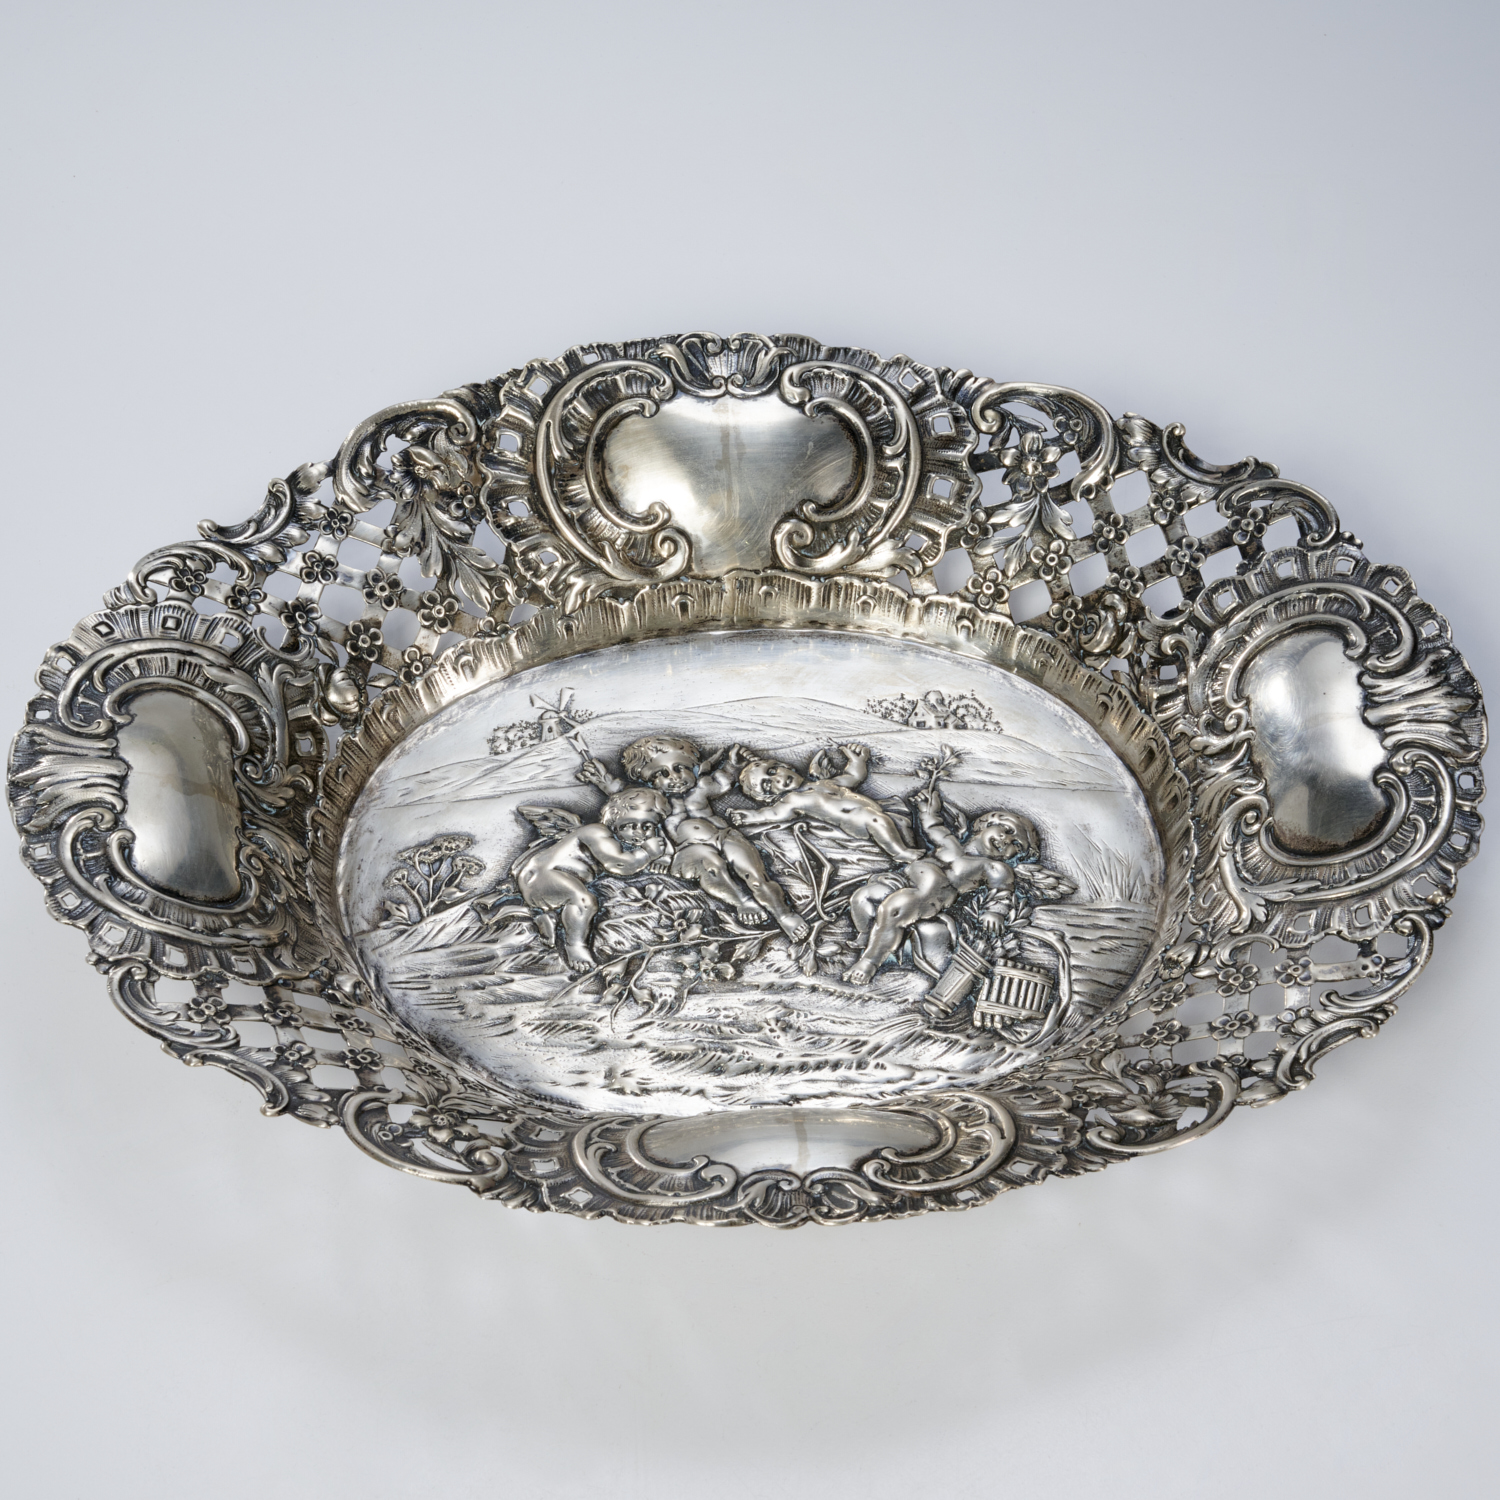 GERMAN SILVER 13 REPOUSSE DISH 2fb8ee